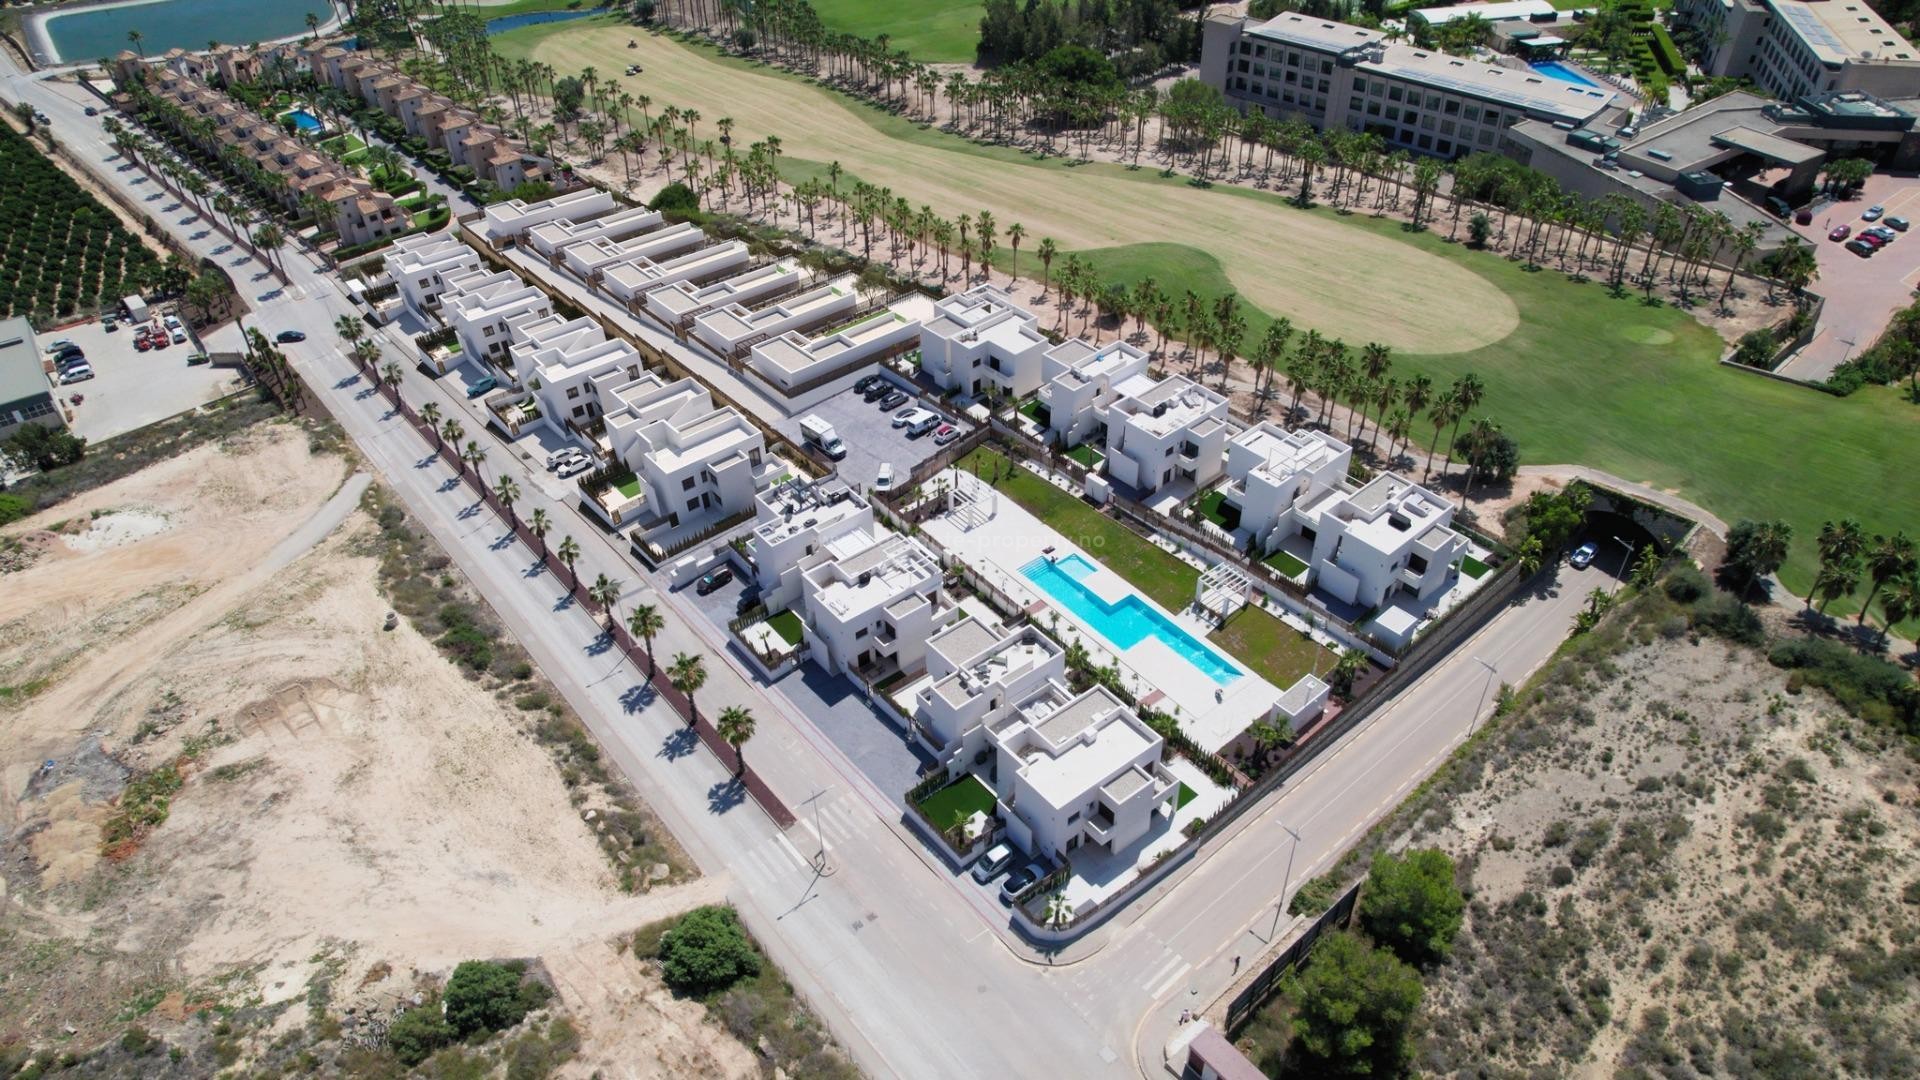 New propeties in La Finca Golf, Bungalows/apartments, 2 bedrooms, 2 bathrooms, terrace/garden or terrace/solarium. Communal pool and location on a golf course